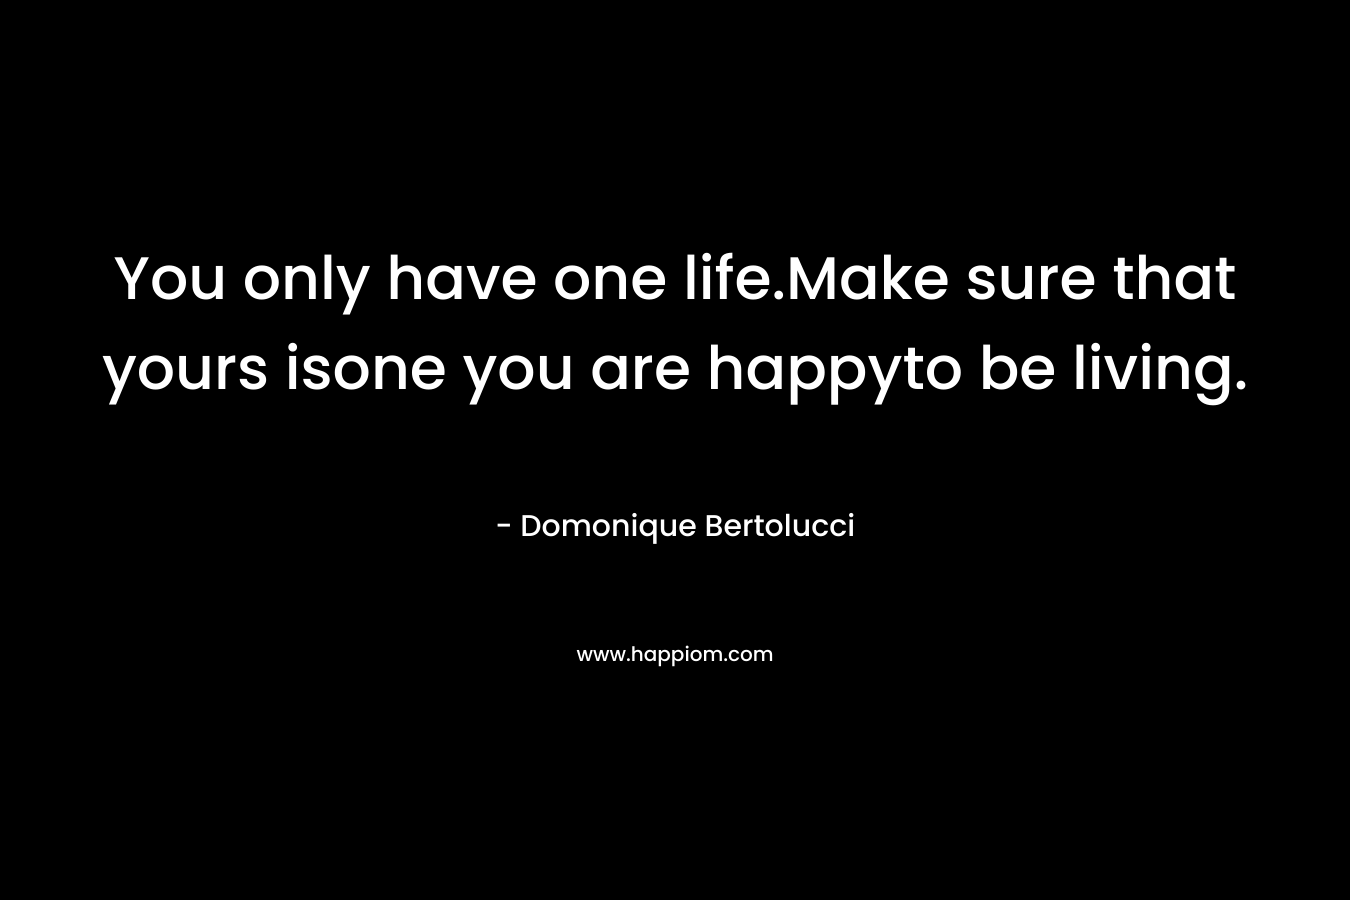 You only have one life.Make sure that yours isone you are happyto be living.